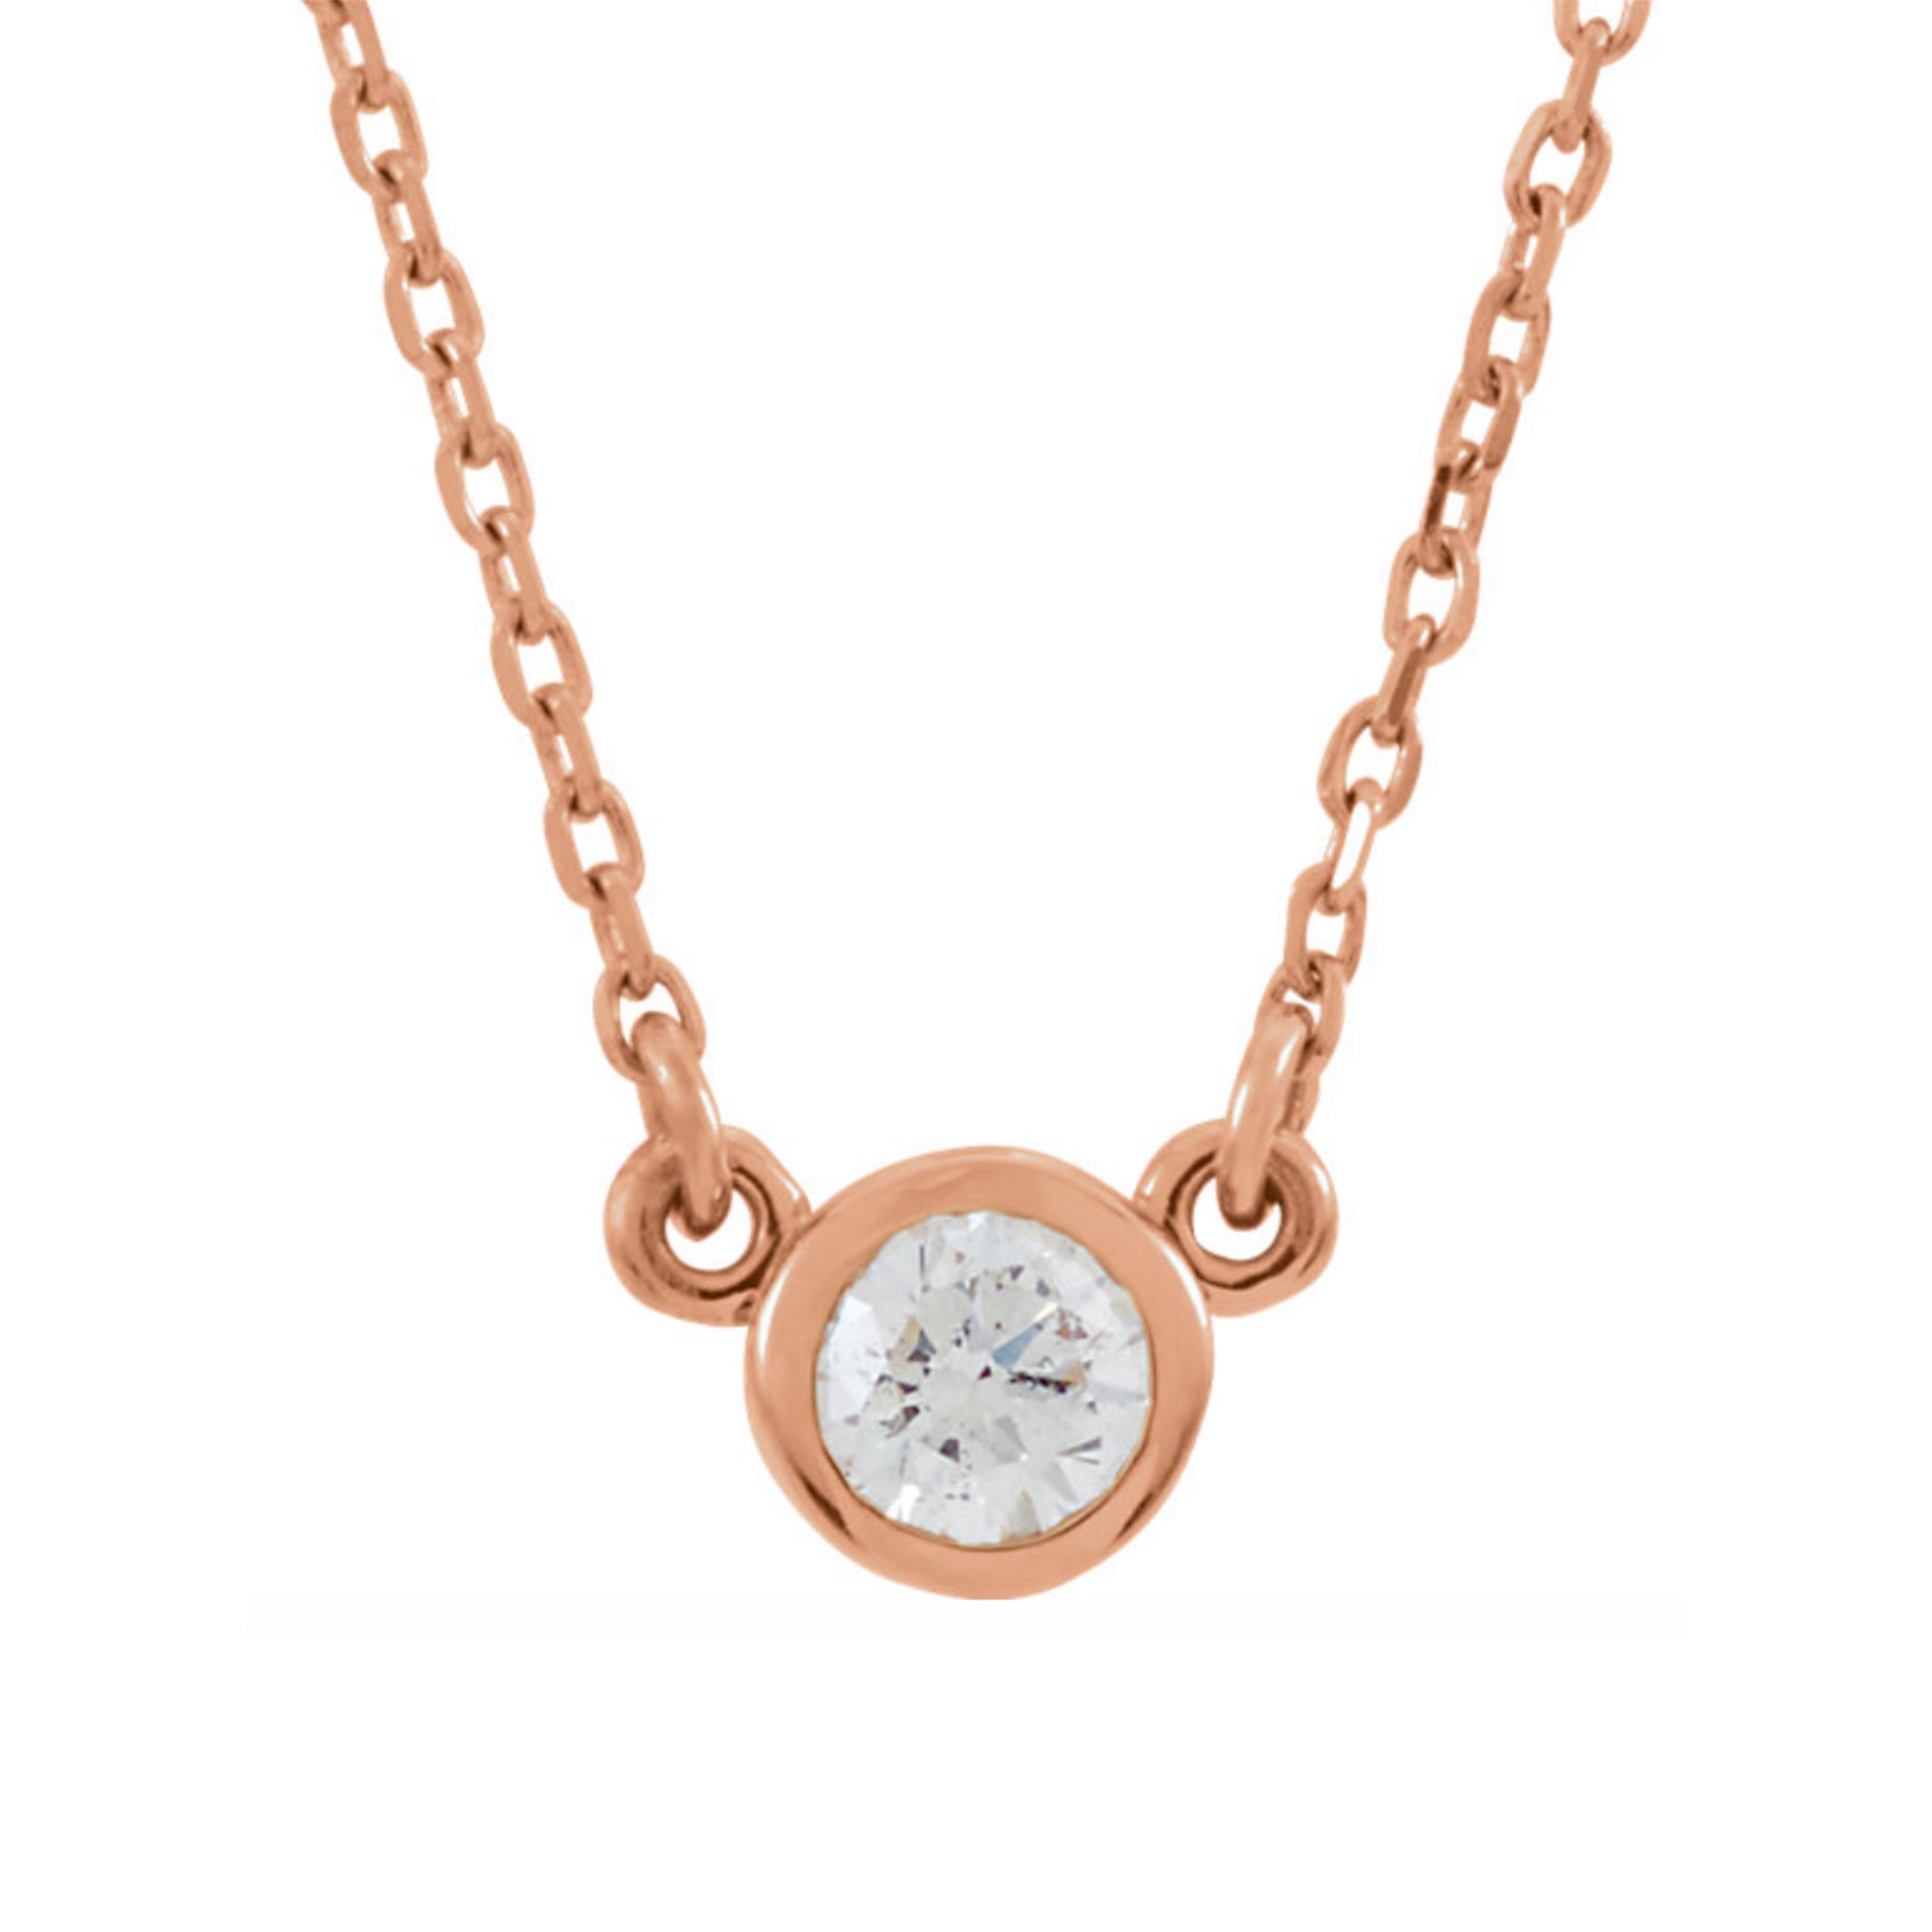 Genuine Gemstone Bezel-Set  Necklace in White, Yellow or Rose Gold - Talisman Collection Fine Jewelers